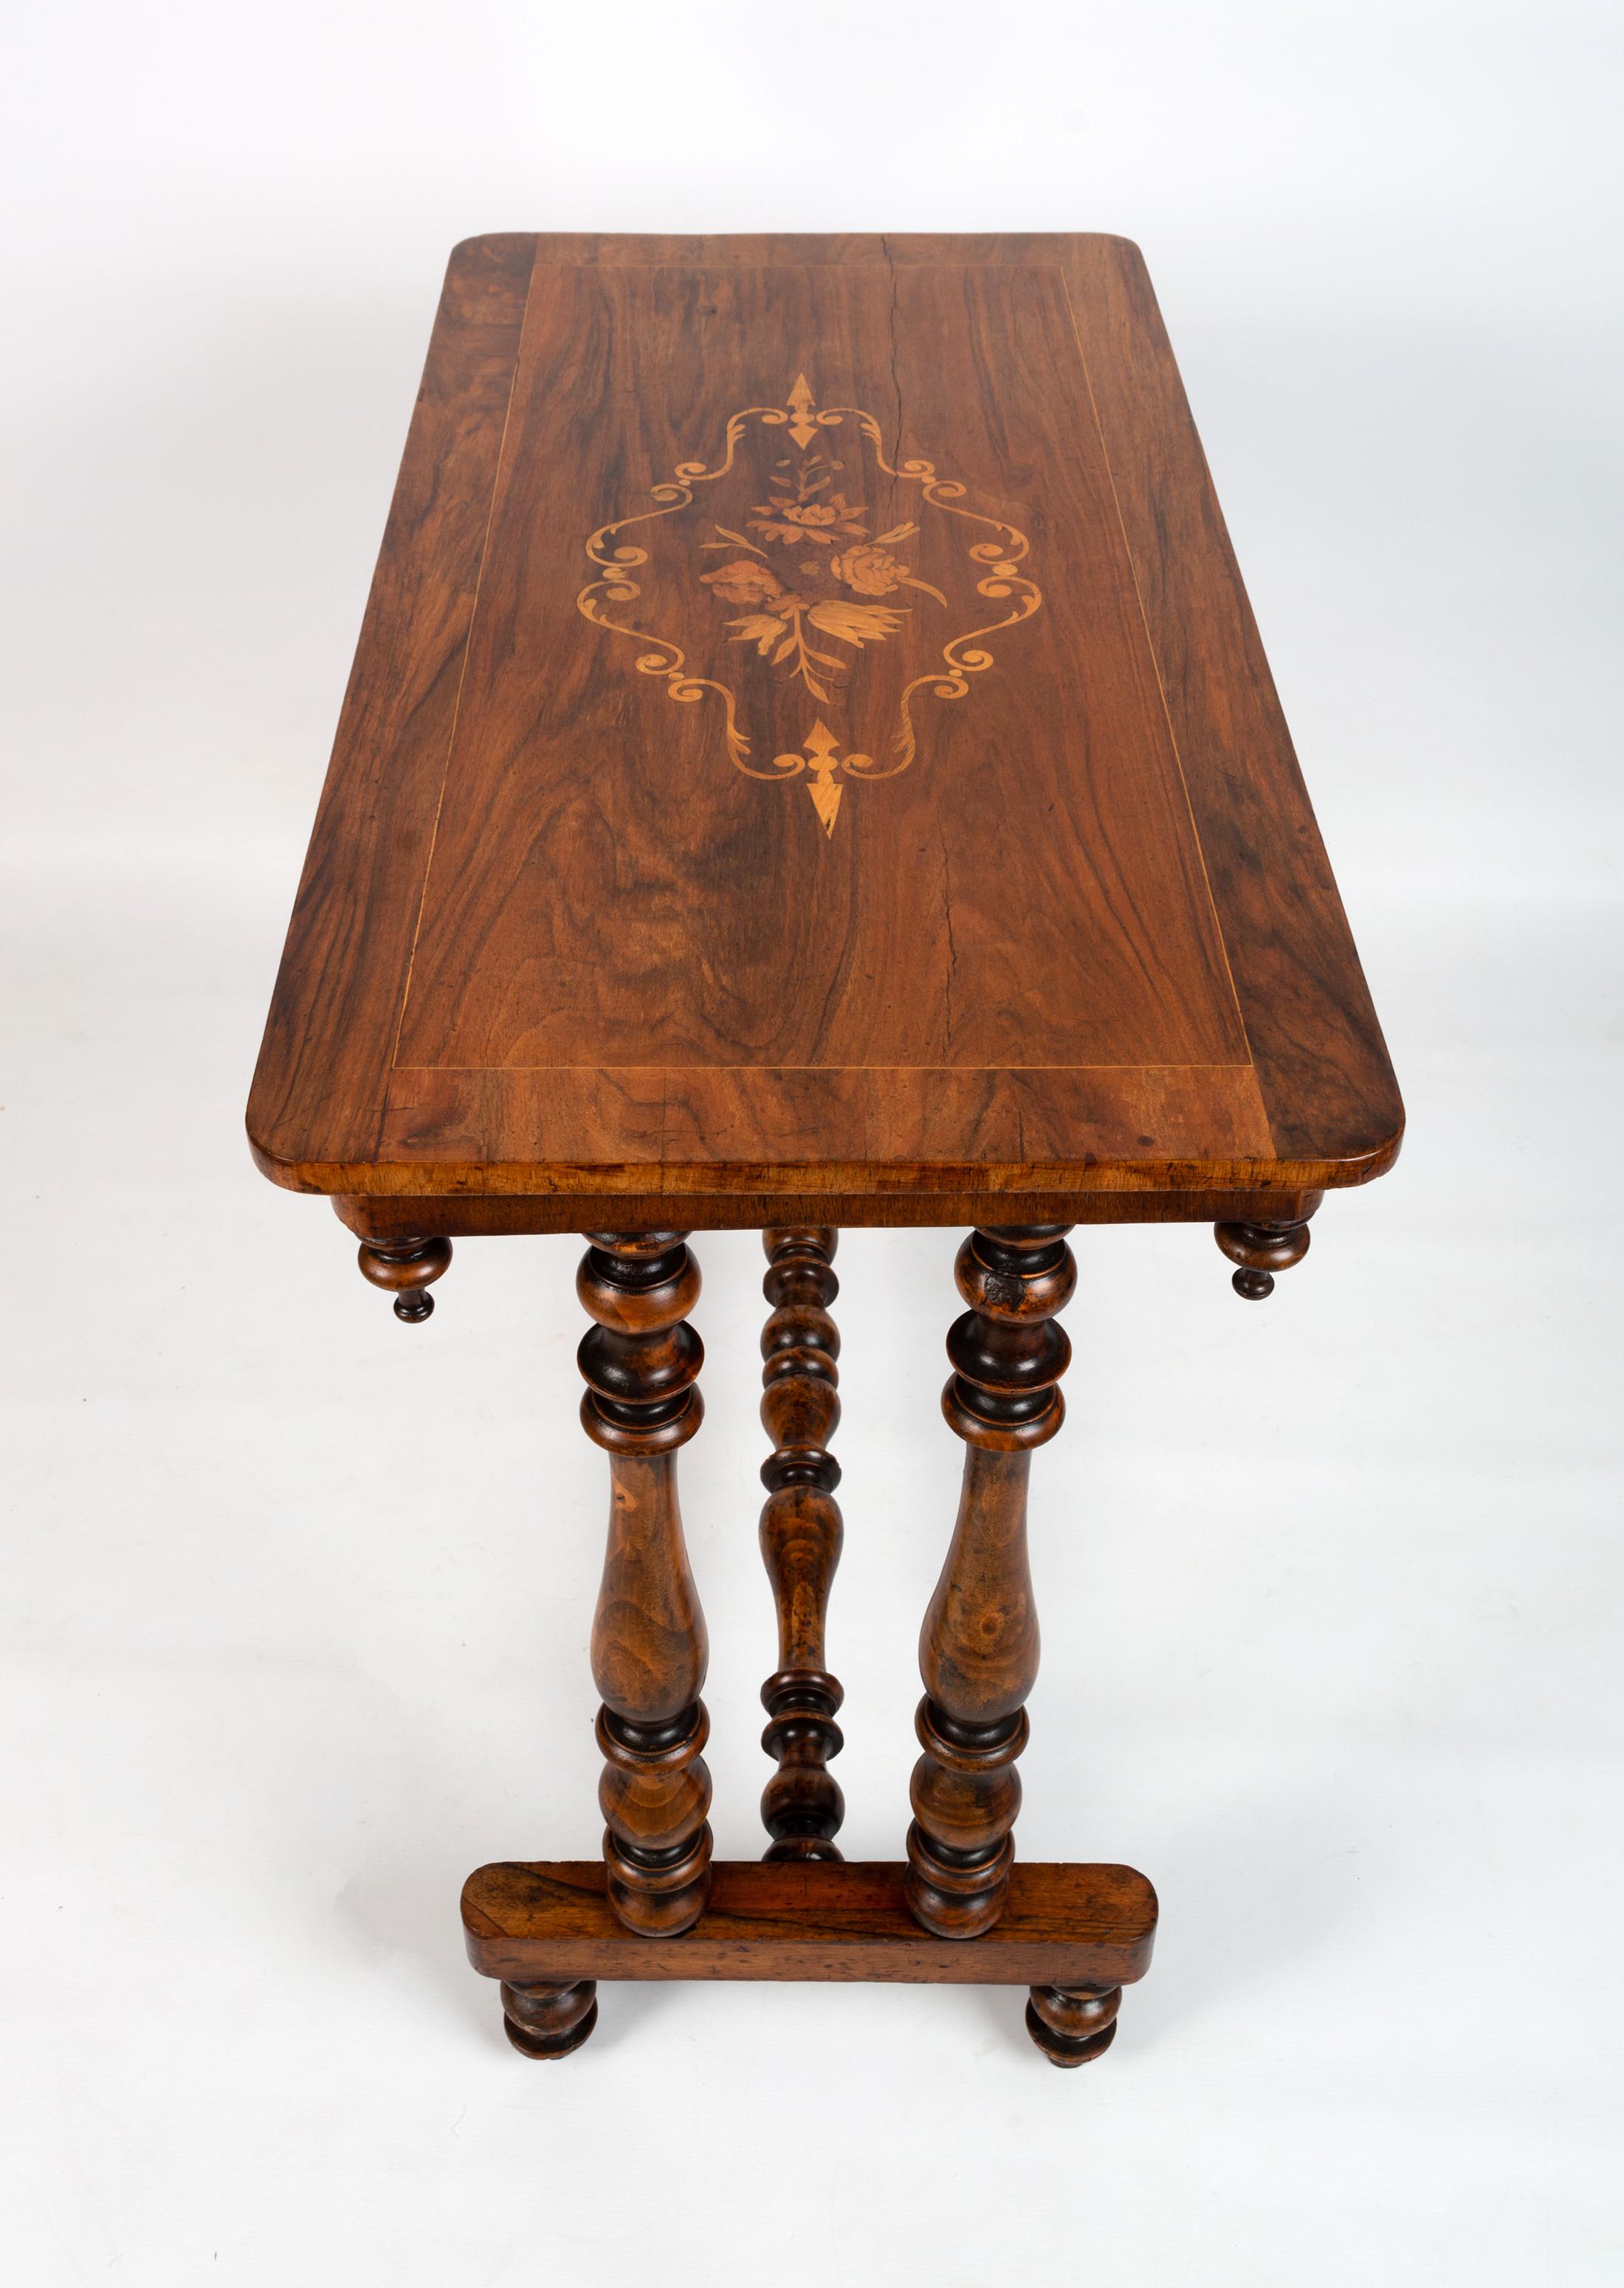 Antique English Edwardian Inlaid Walnut Hall Table Console C.1900 For Sale 1